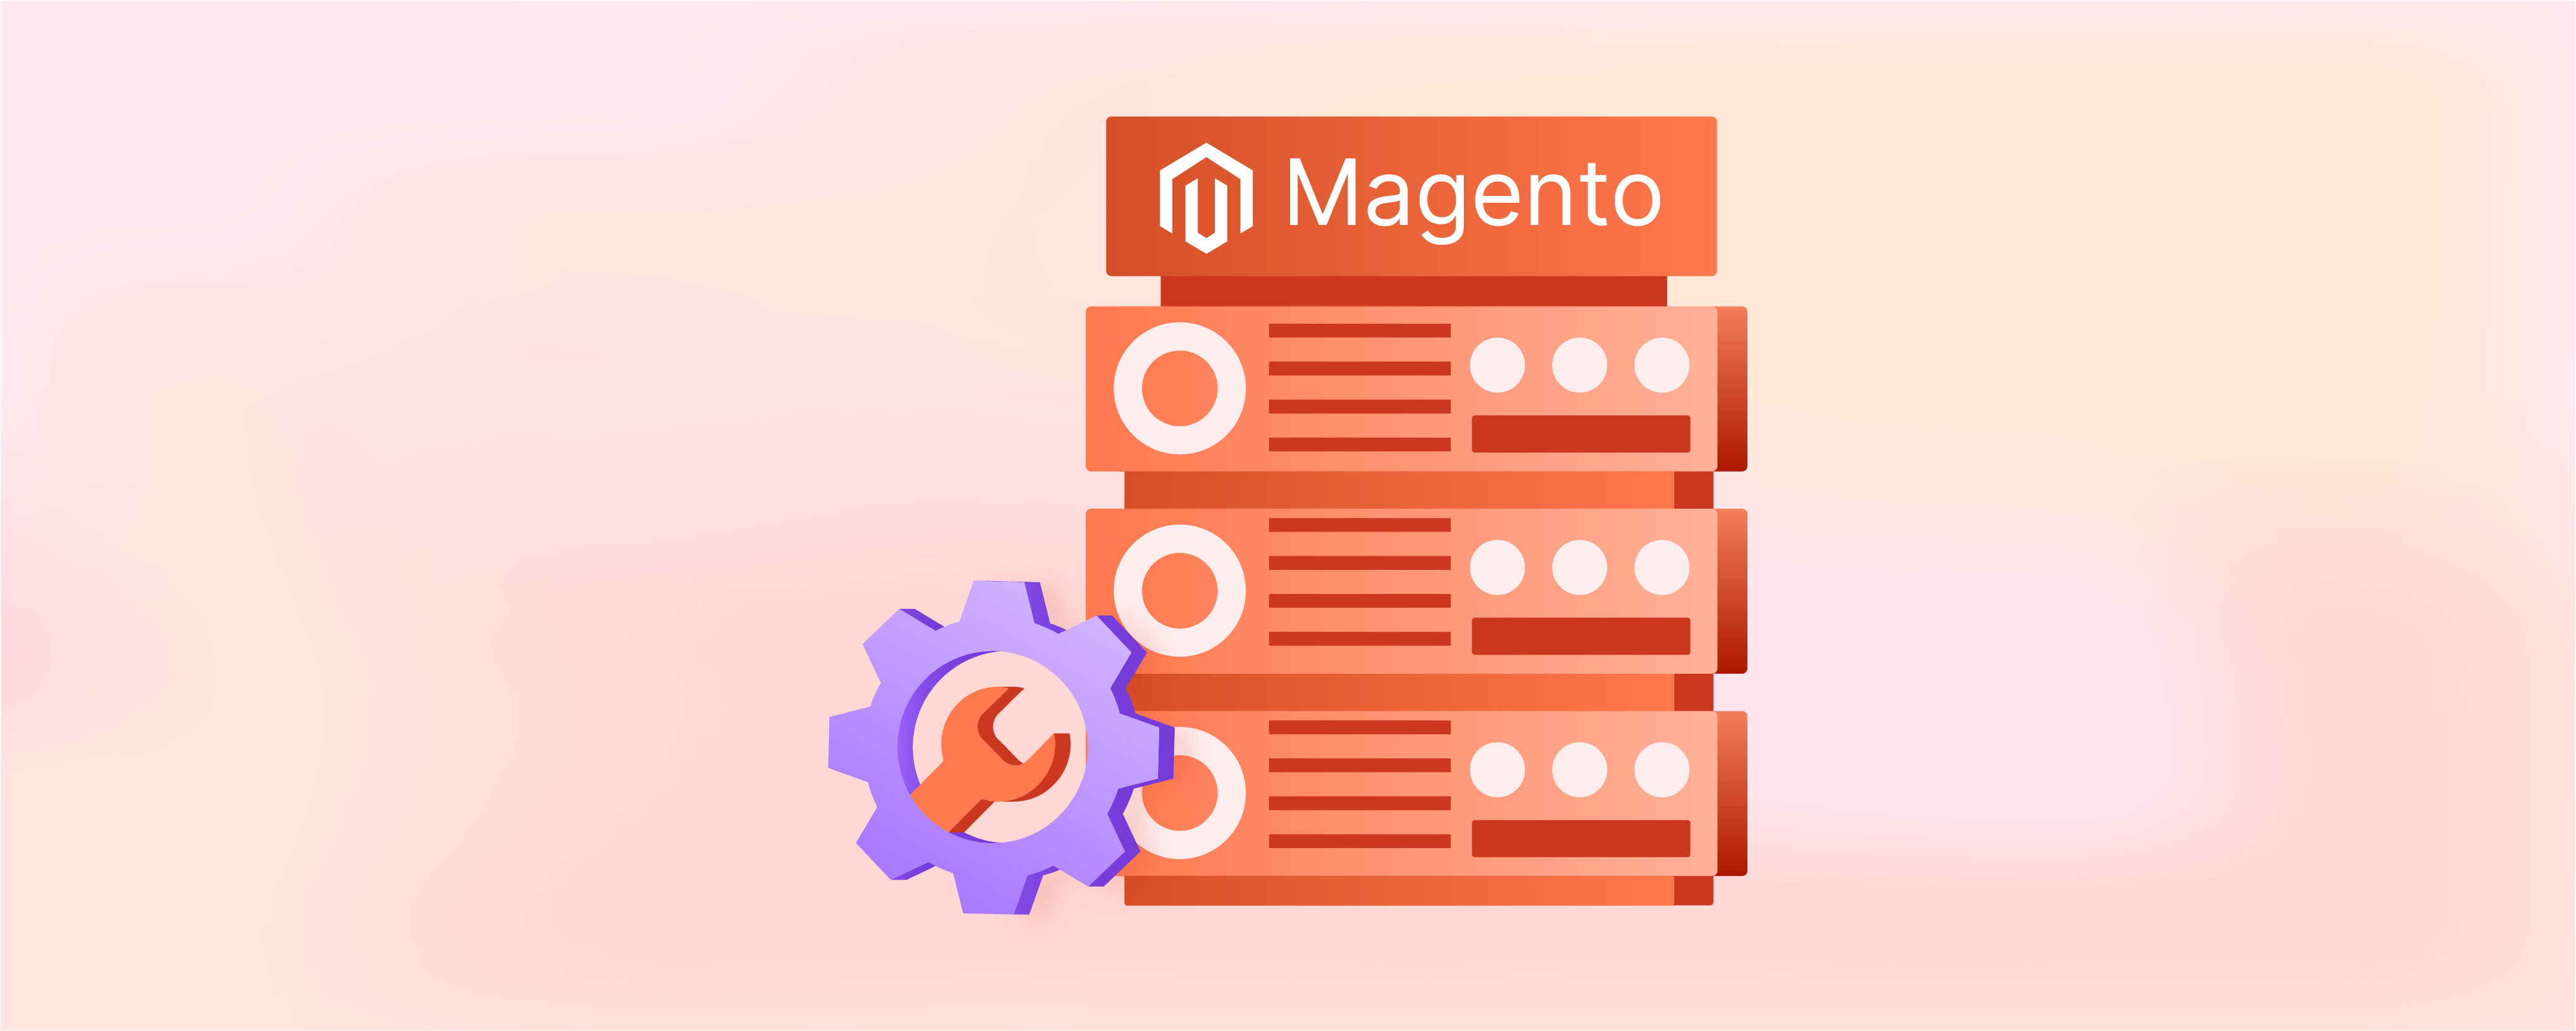 Magento Installation Issues: How to Fix?